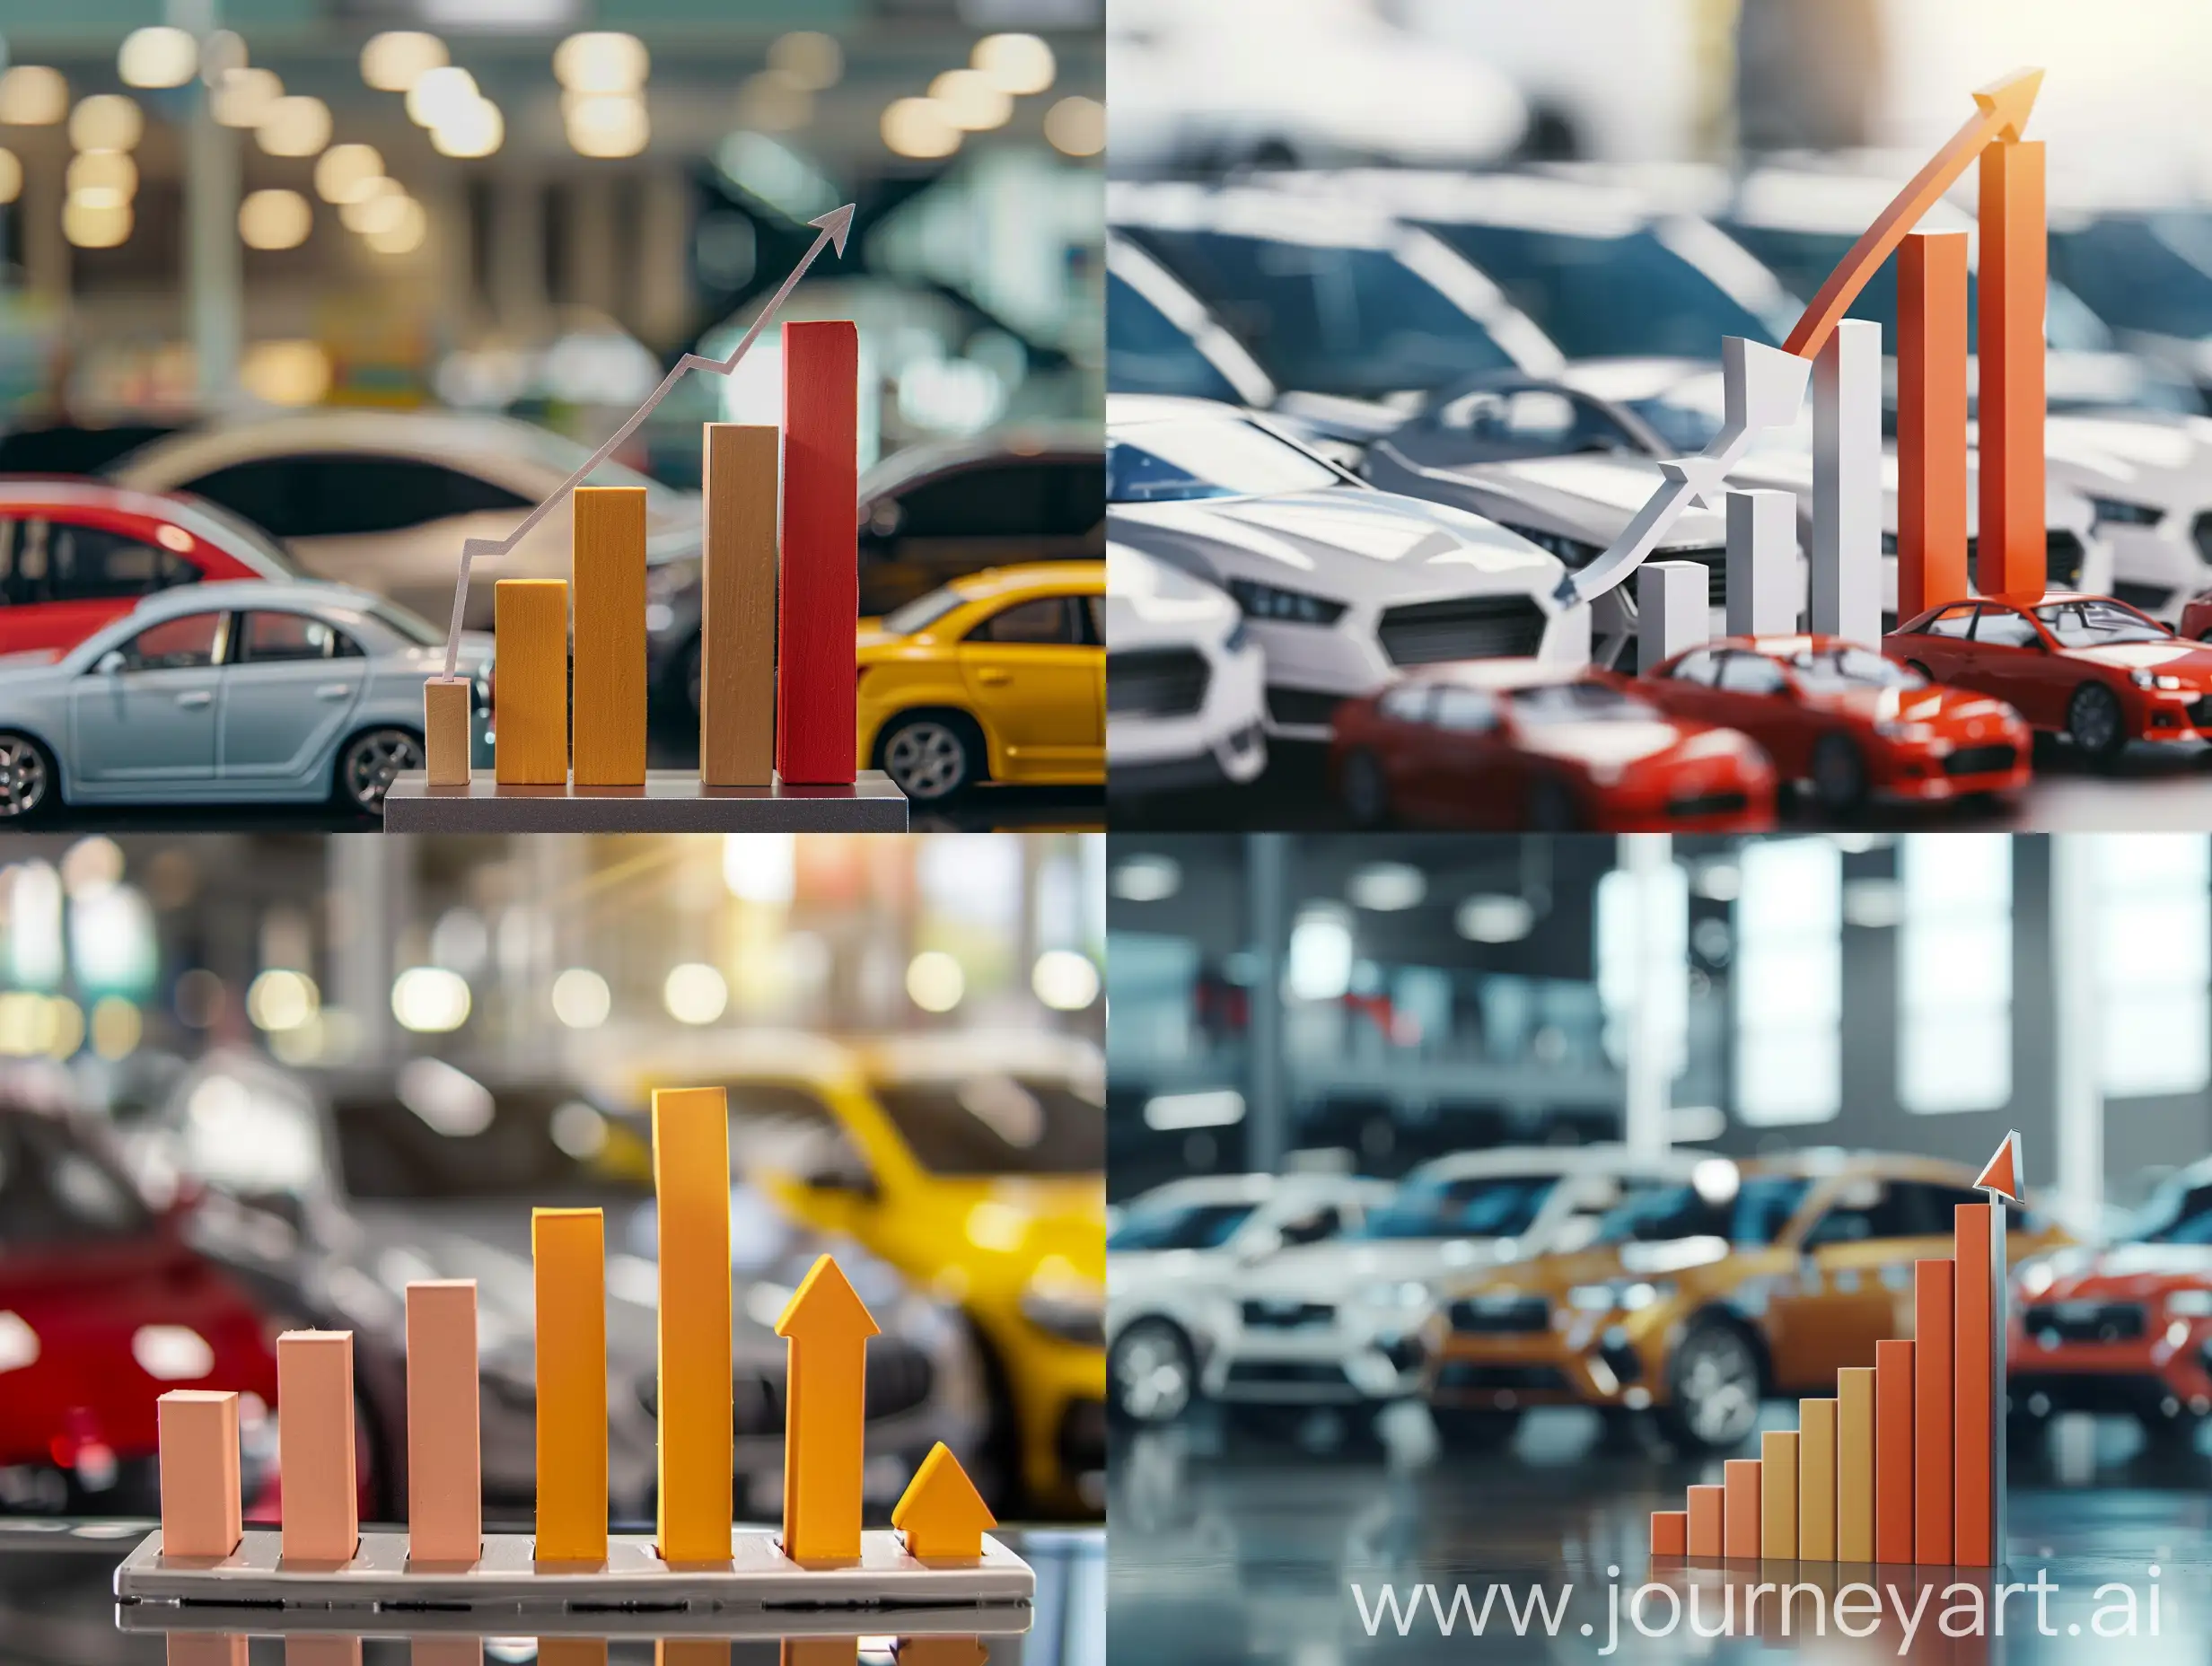 minimalist editorial photograph of a simple, minimal bar graph increase in a contrasting color or with an upward arrow, with the background of car fleet, style raw